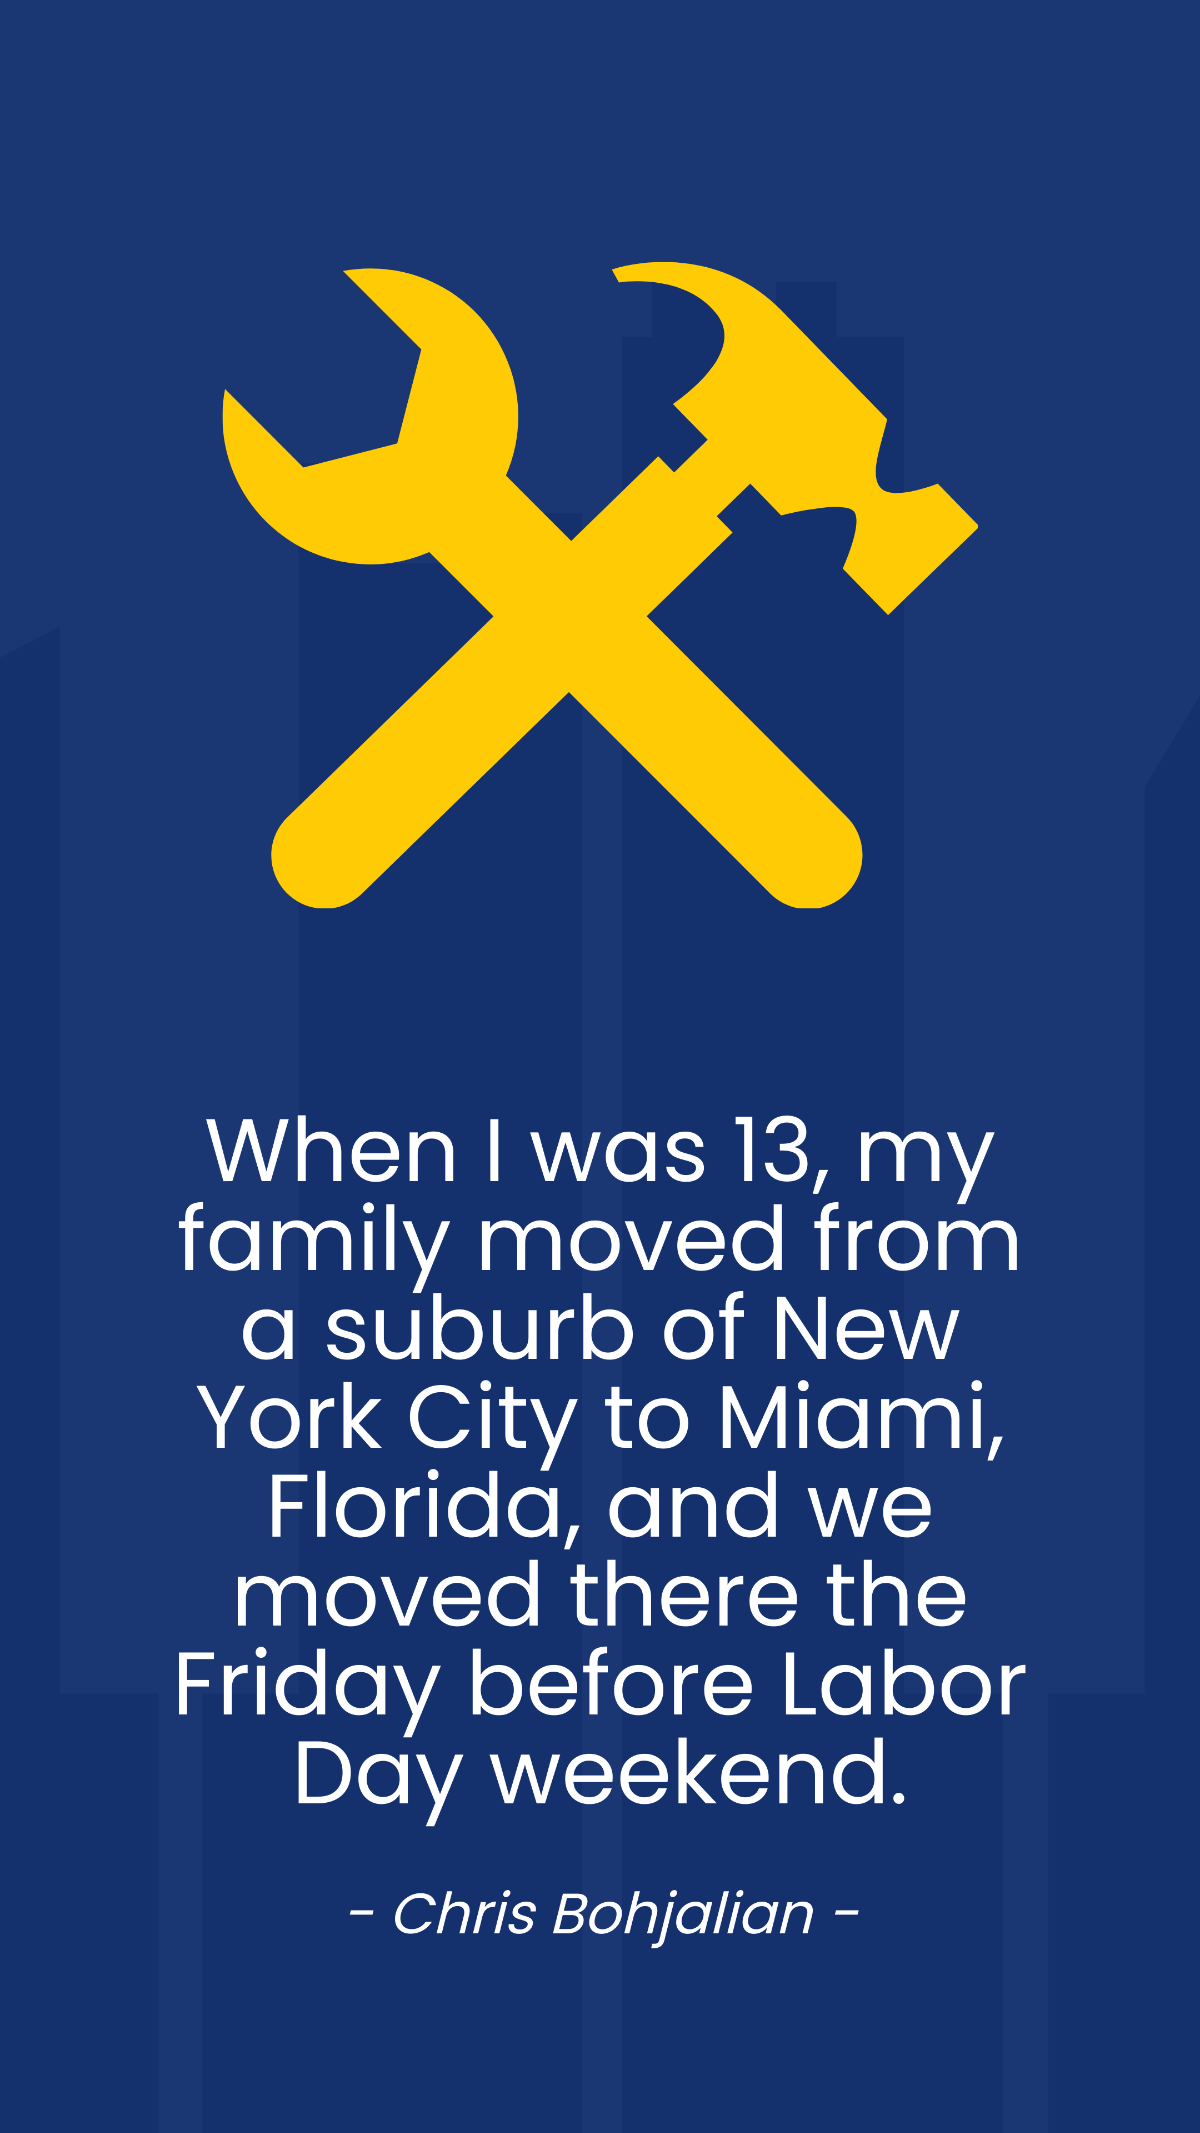 Chris Bohjalian - When I was 13, my family moved from a suburb of New York City to Miami, Florida, and we moved there the Friday before Labor Day weekend. Template